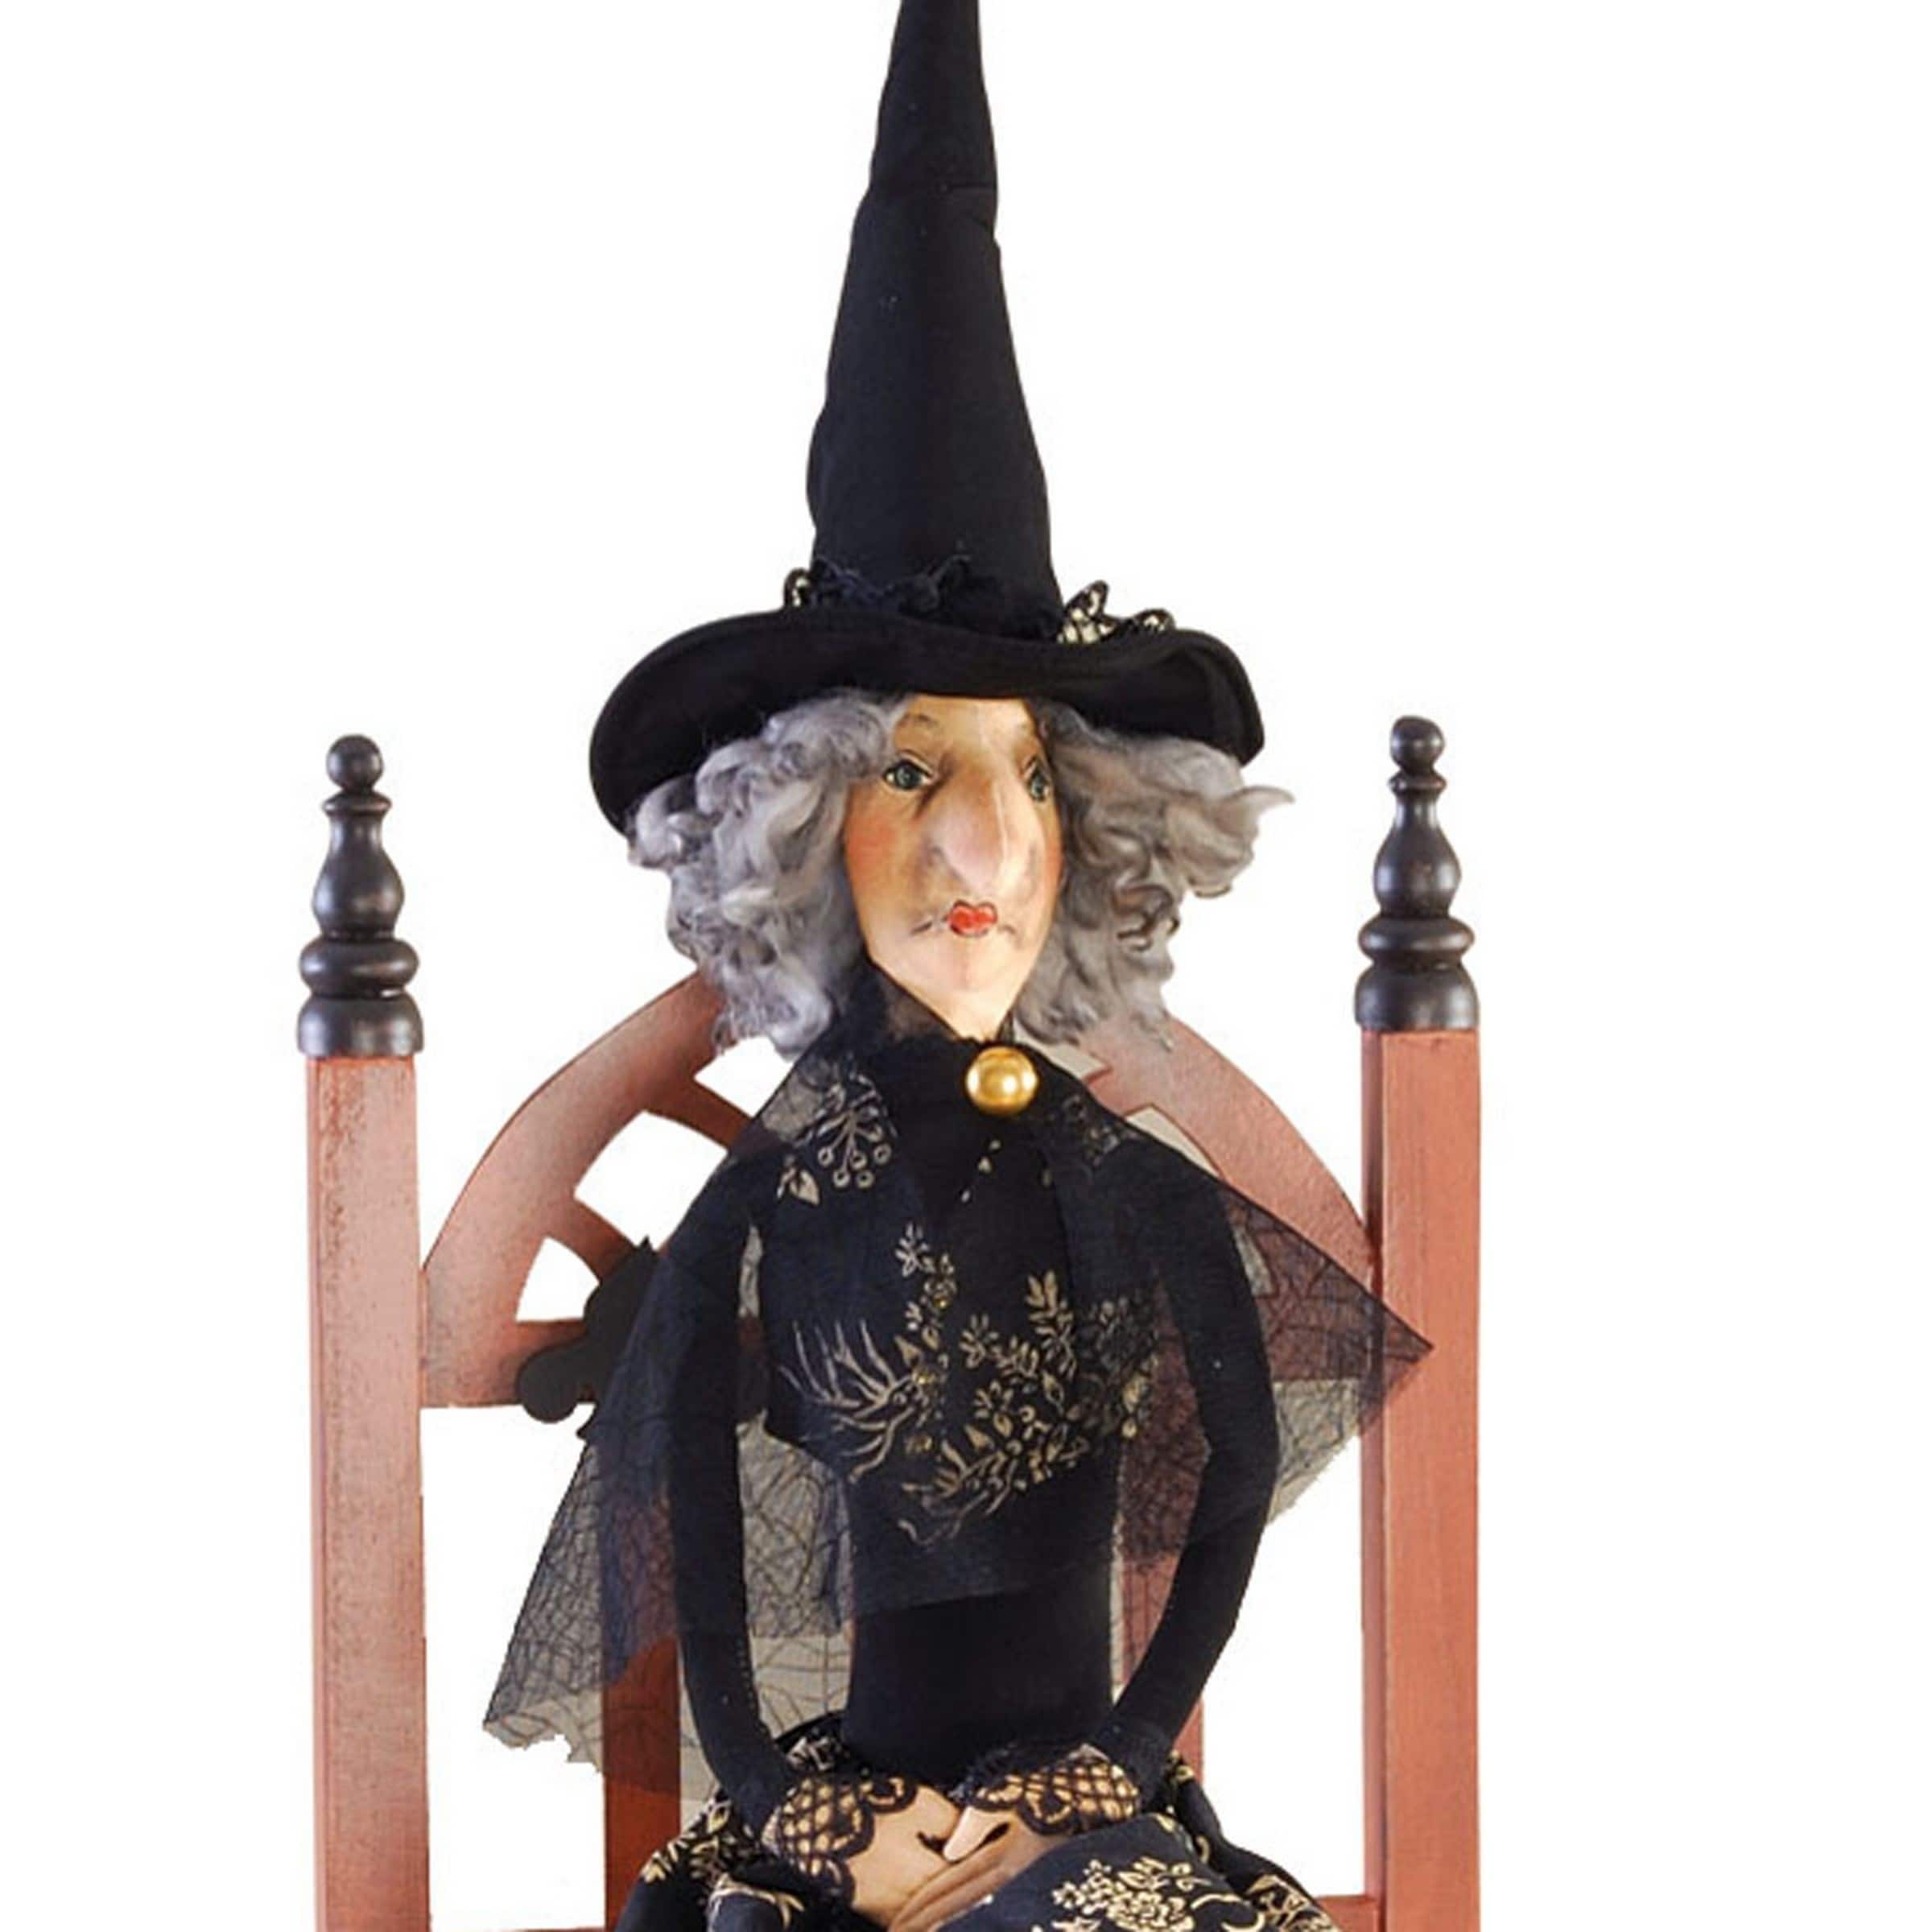 Good Witch/Bad Witch Joe Spencer Gathered Traditions Art Doll